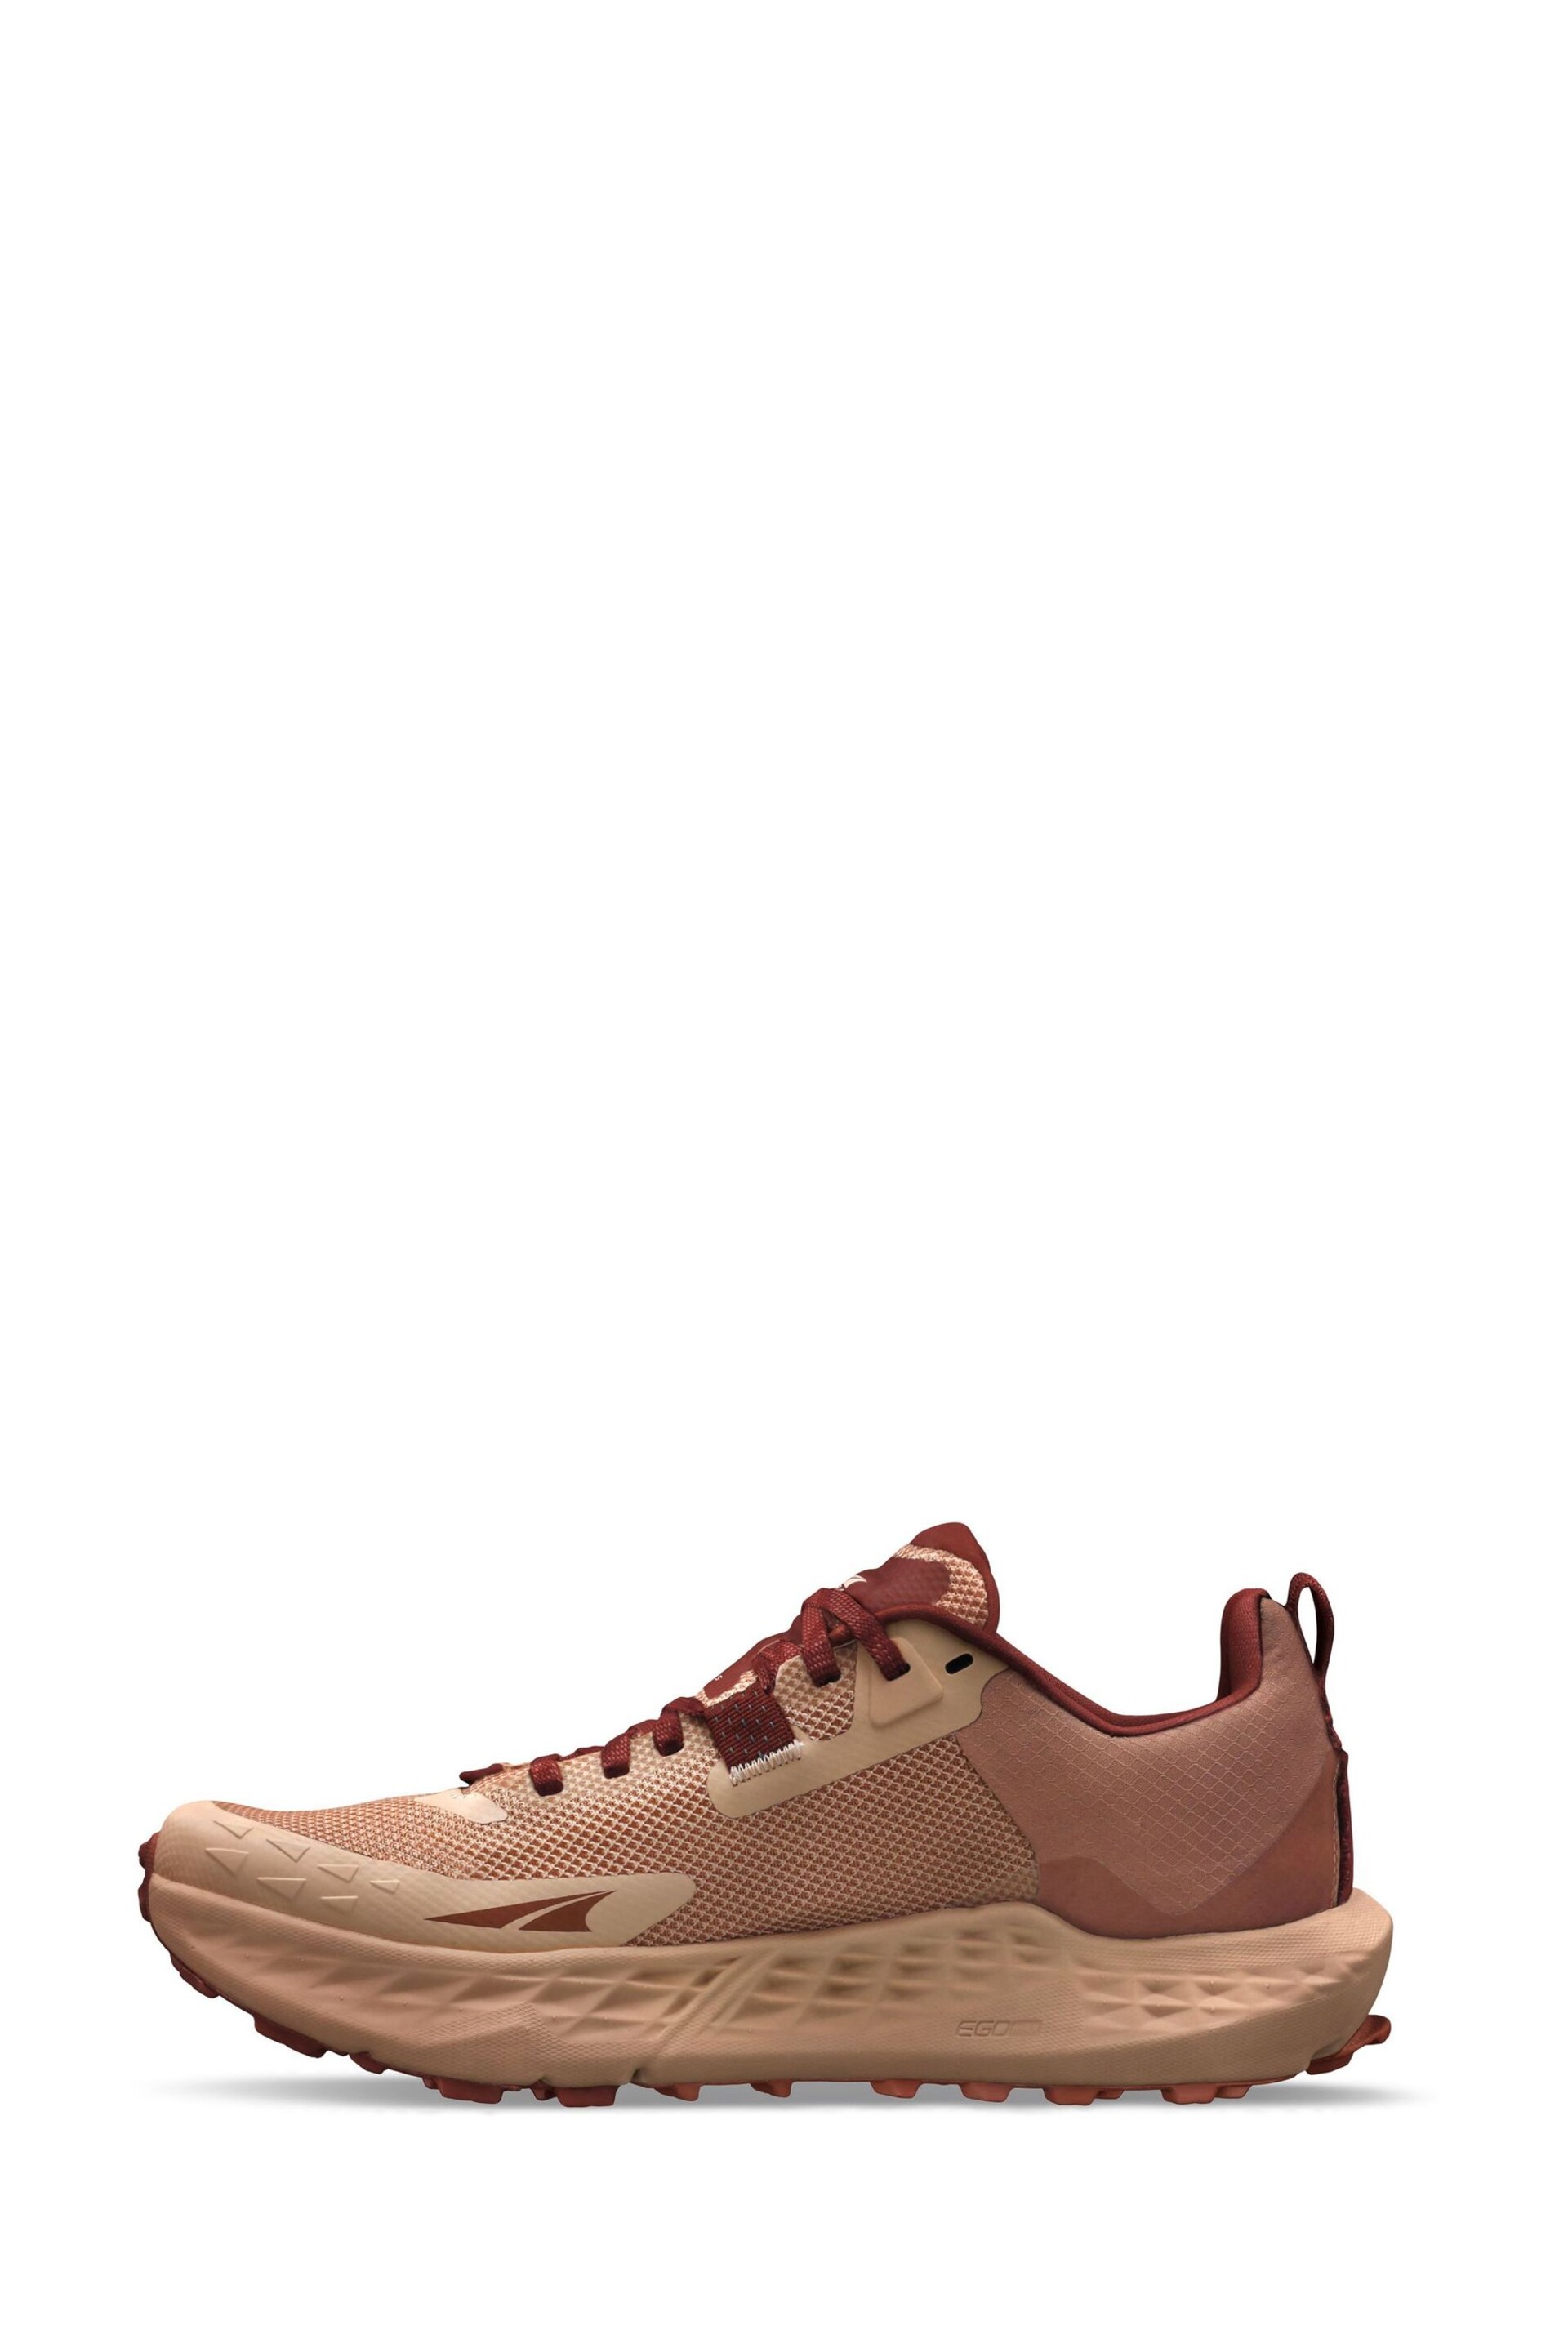 Altra Womens Timp 5 Brown Trainers - Image 2 of 4